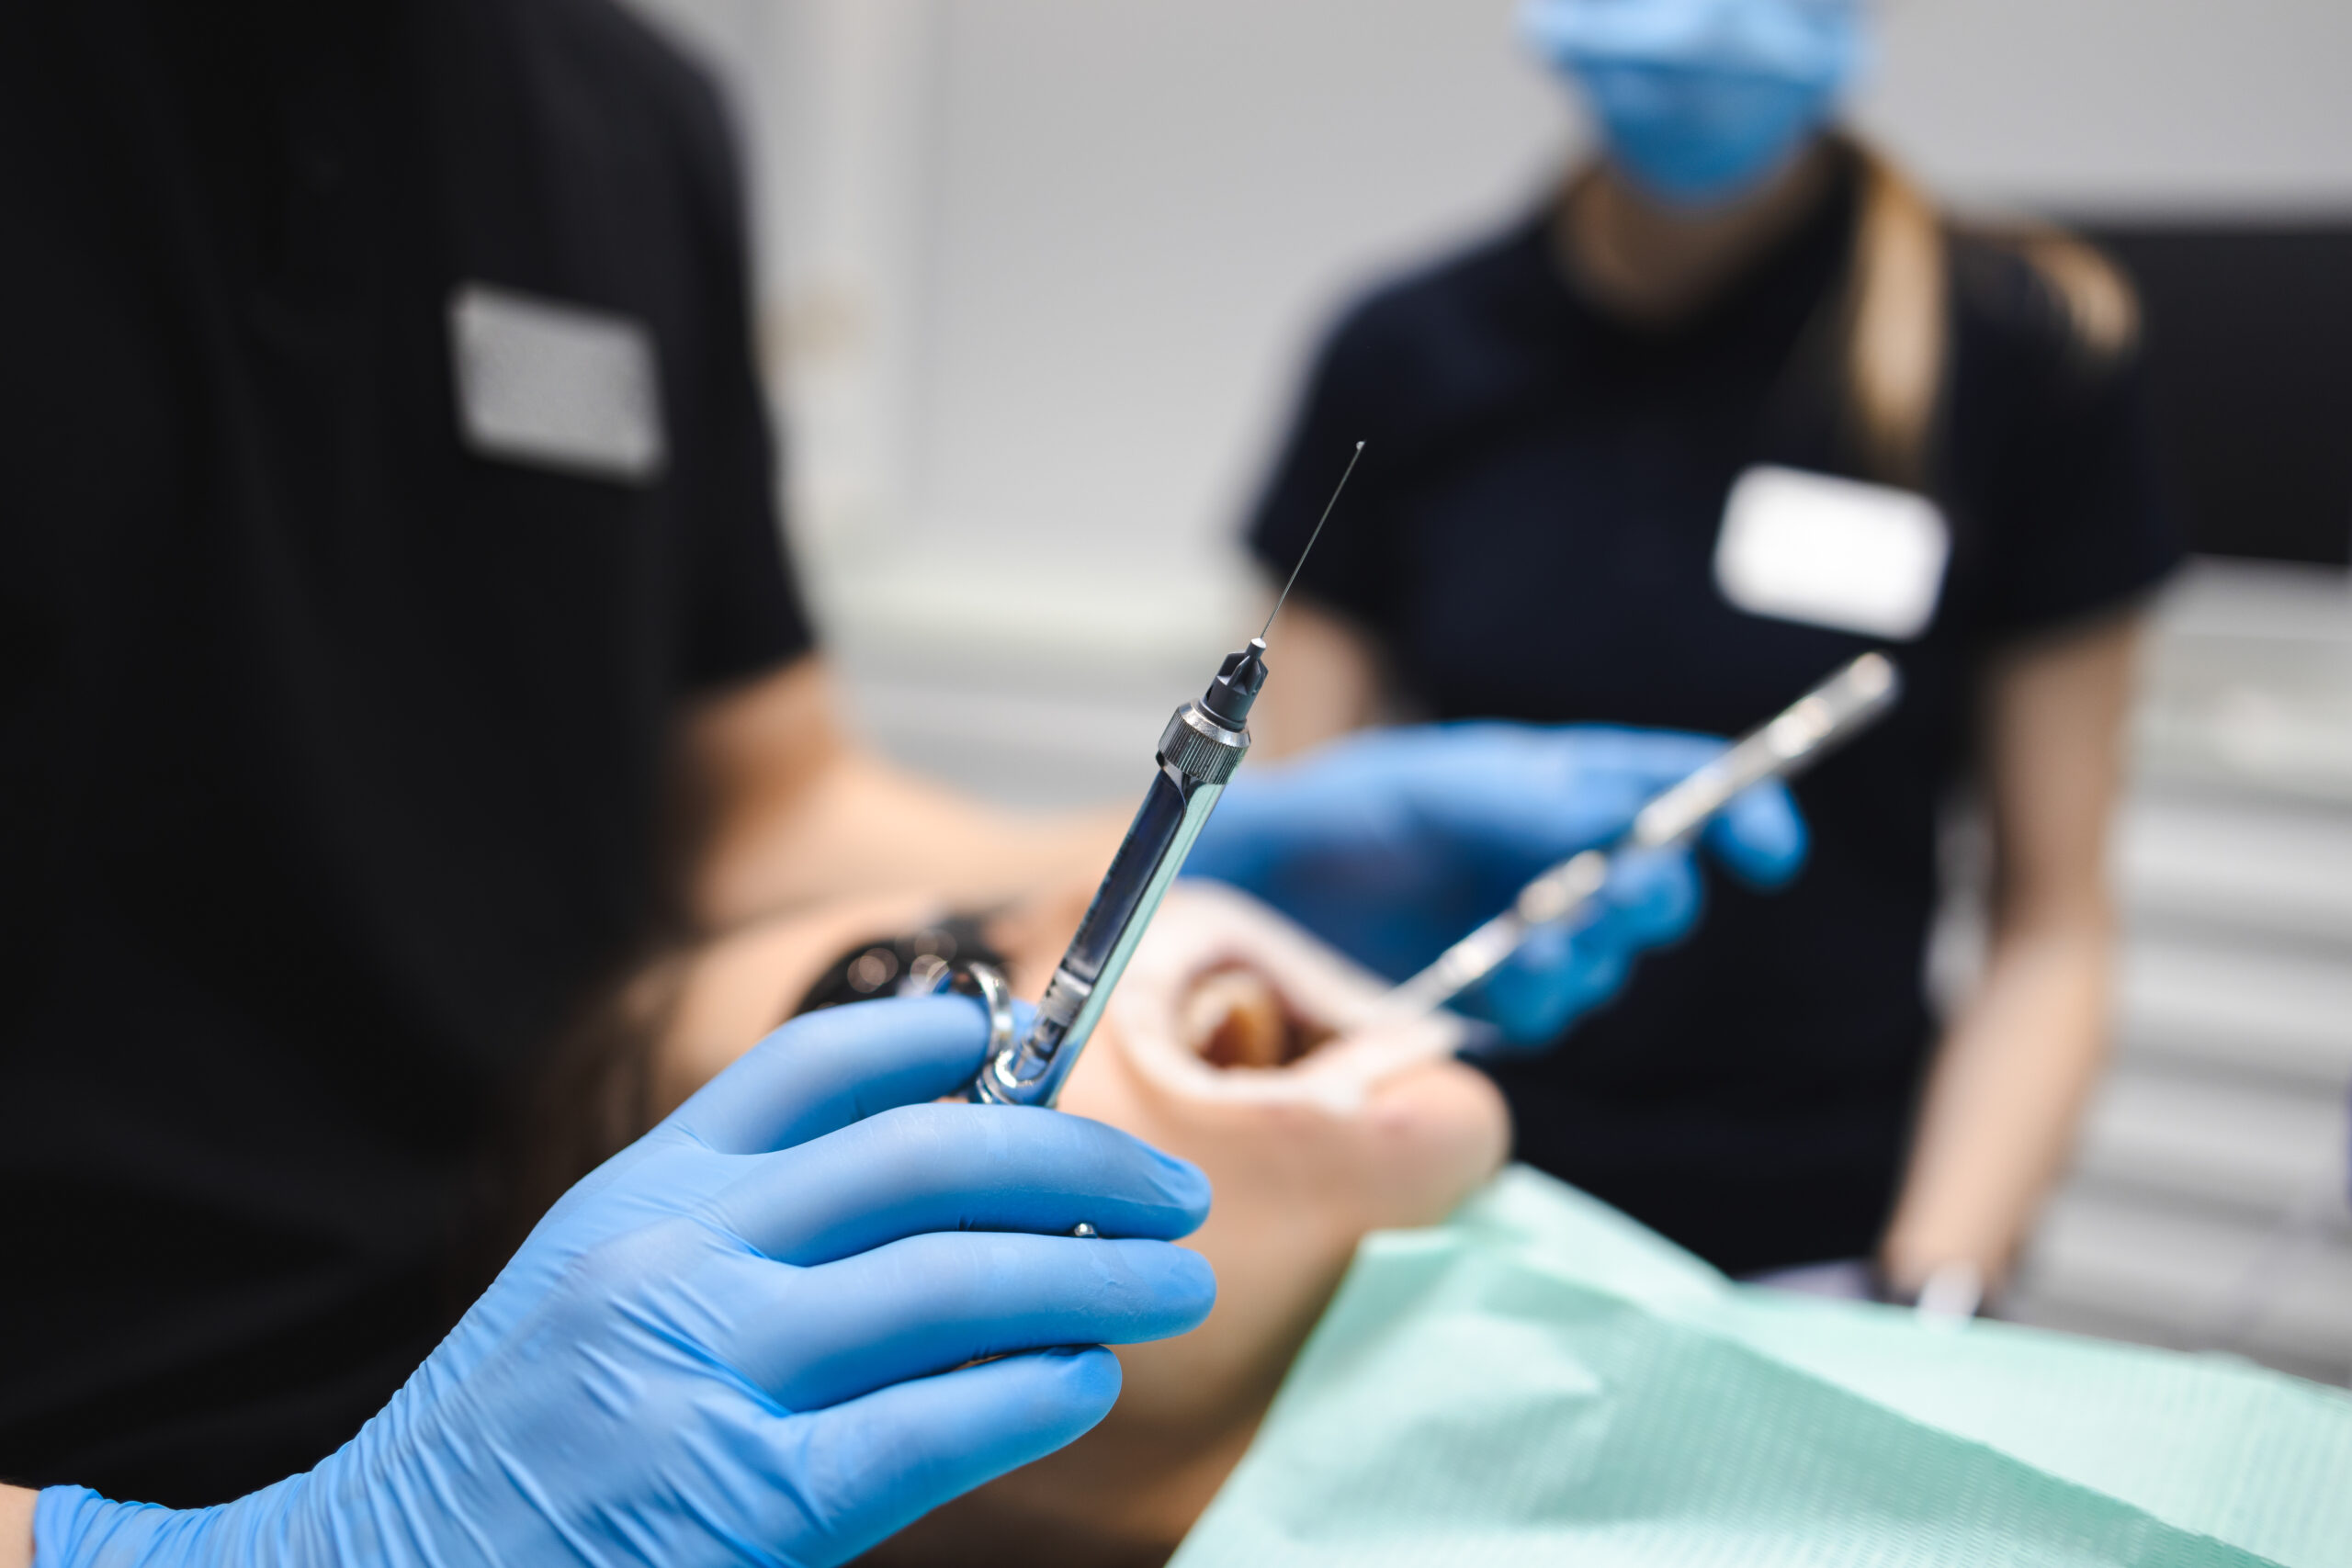 A dentist is about to administer anesthesia before an endodontic procedure.